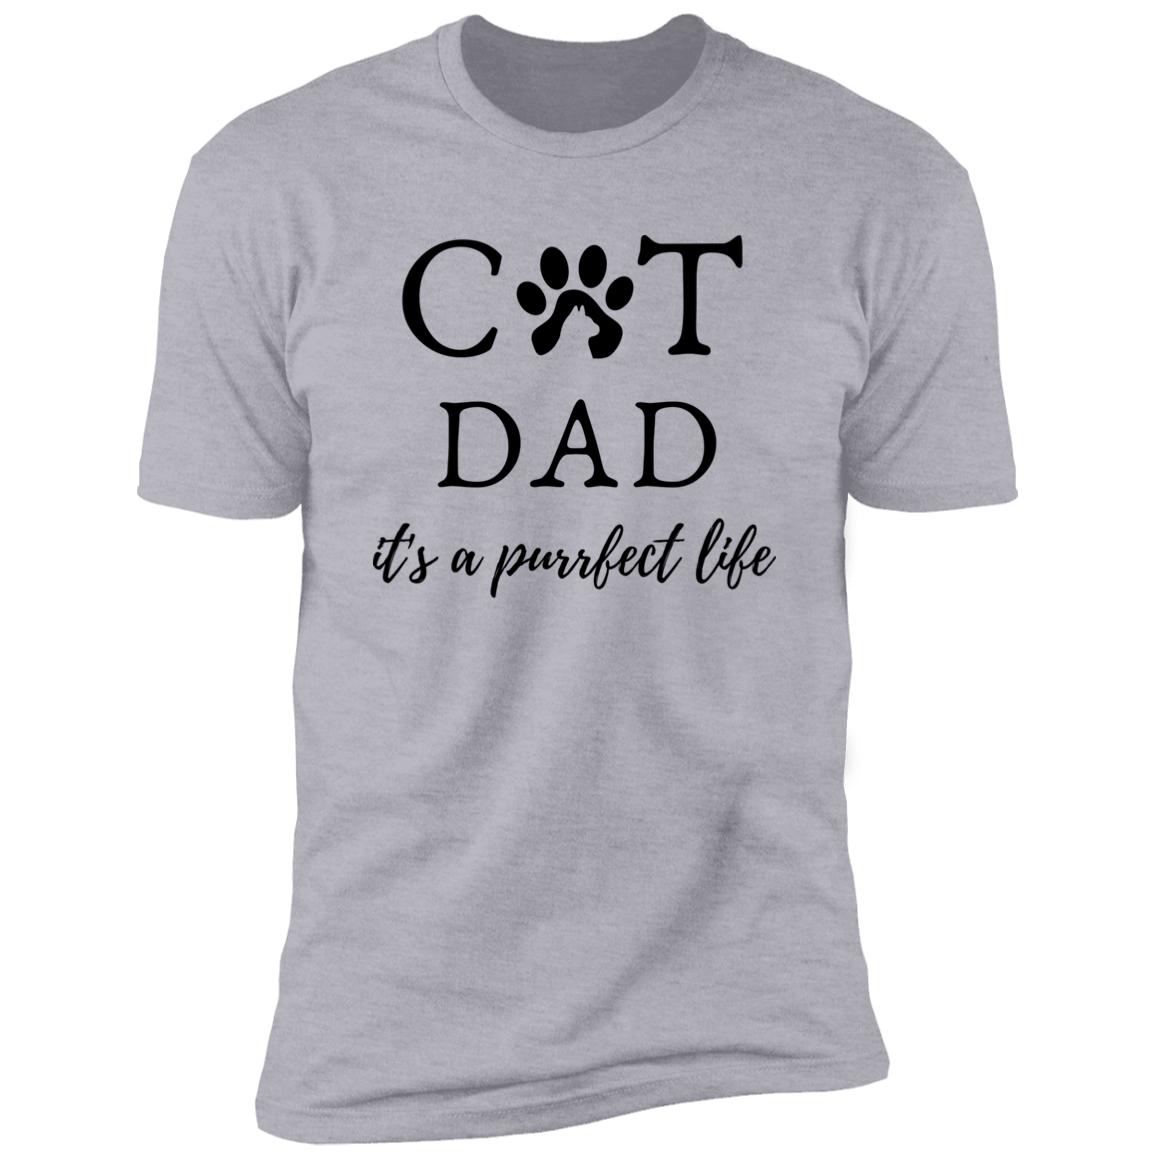 Cat Dad It's a Purrfect Life T-shirt, Cat Dad Shirt for humans, in light heather gray